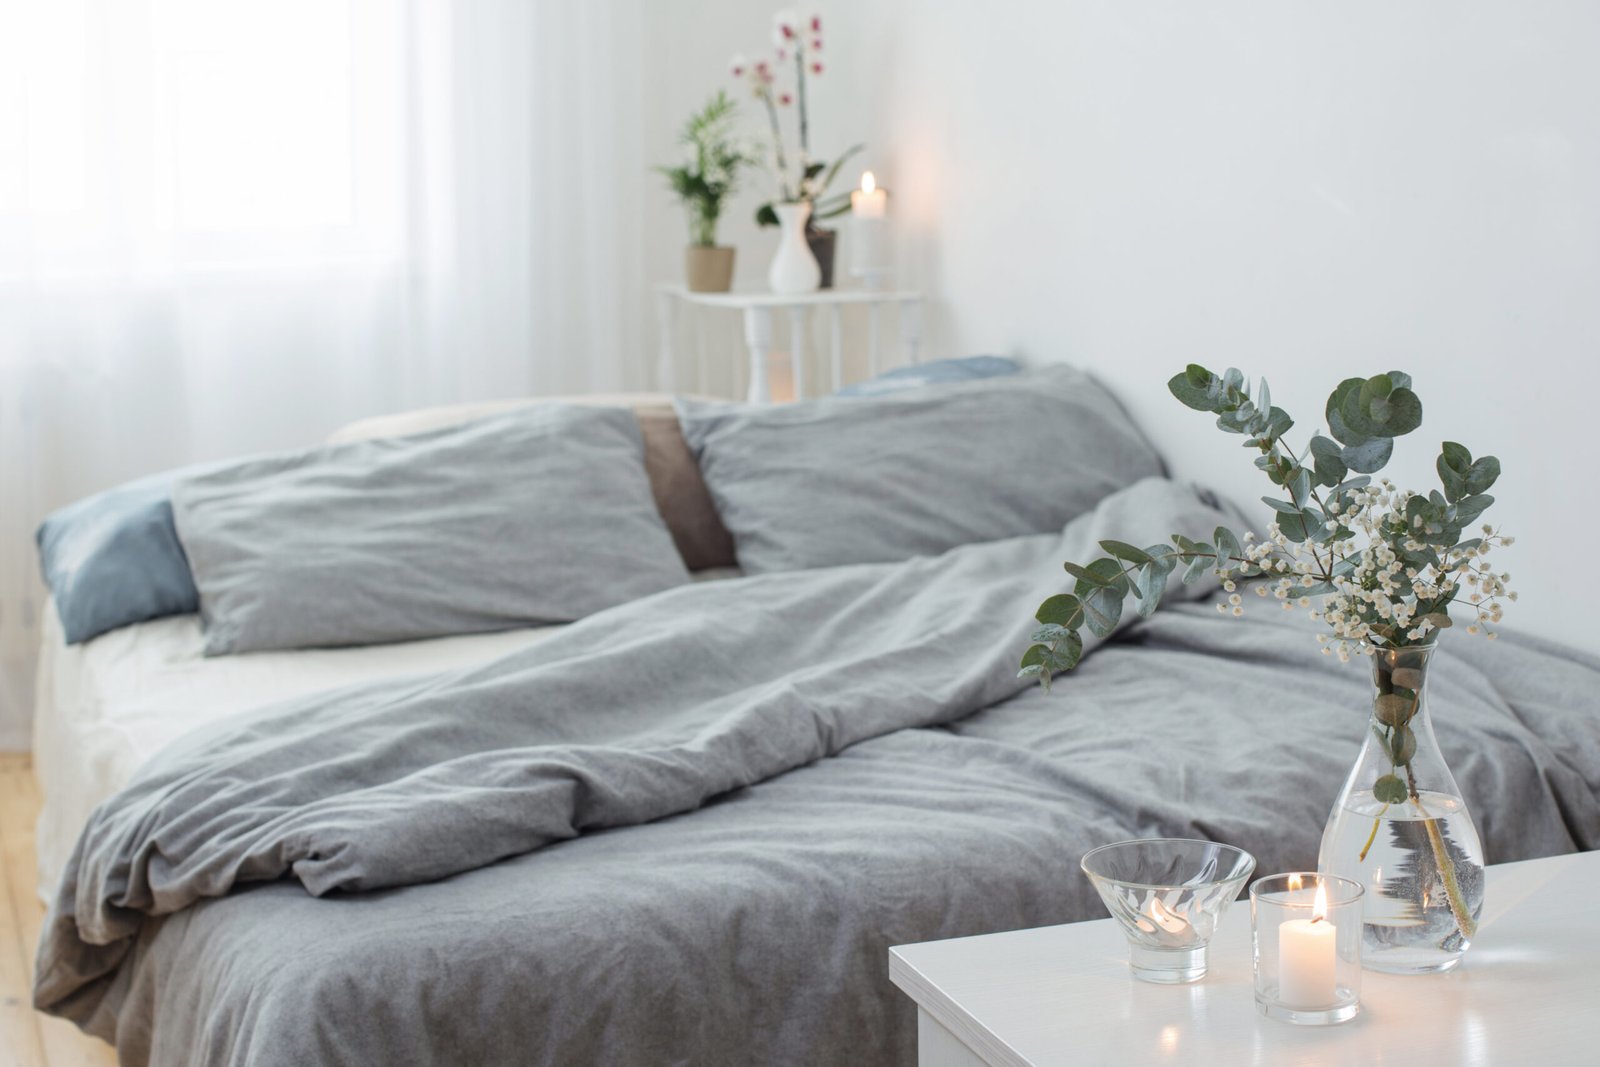 Burning candles and eucalyptus in glass vase in white bedroom, gray bed sheets.